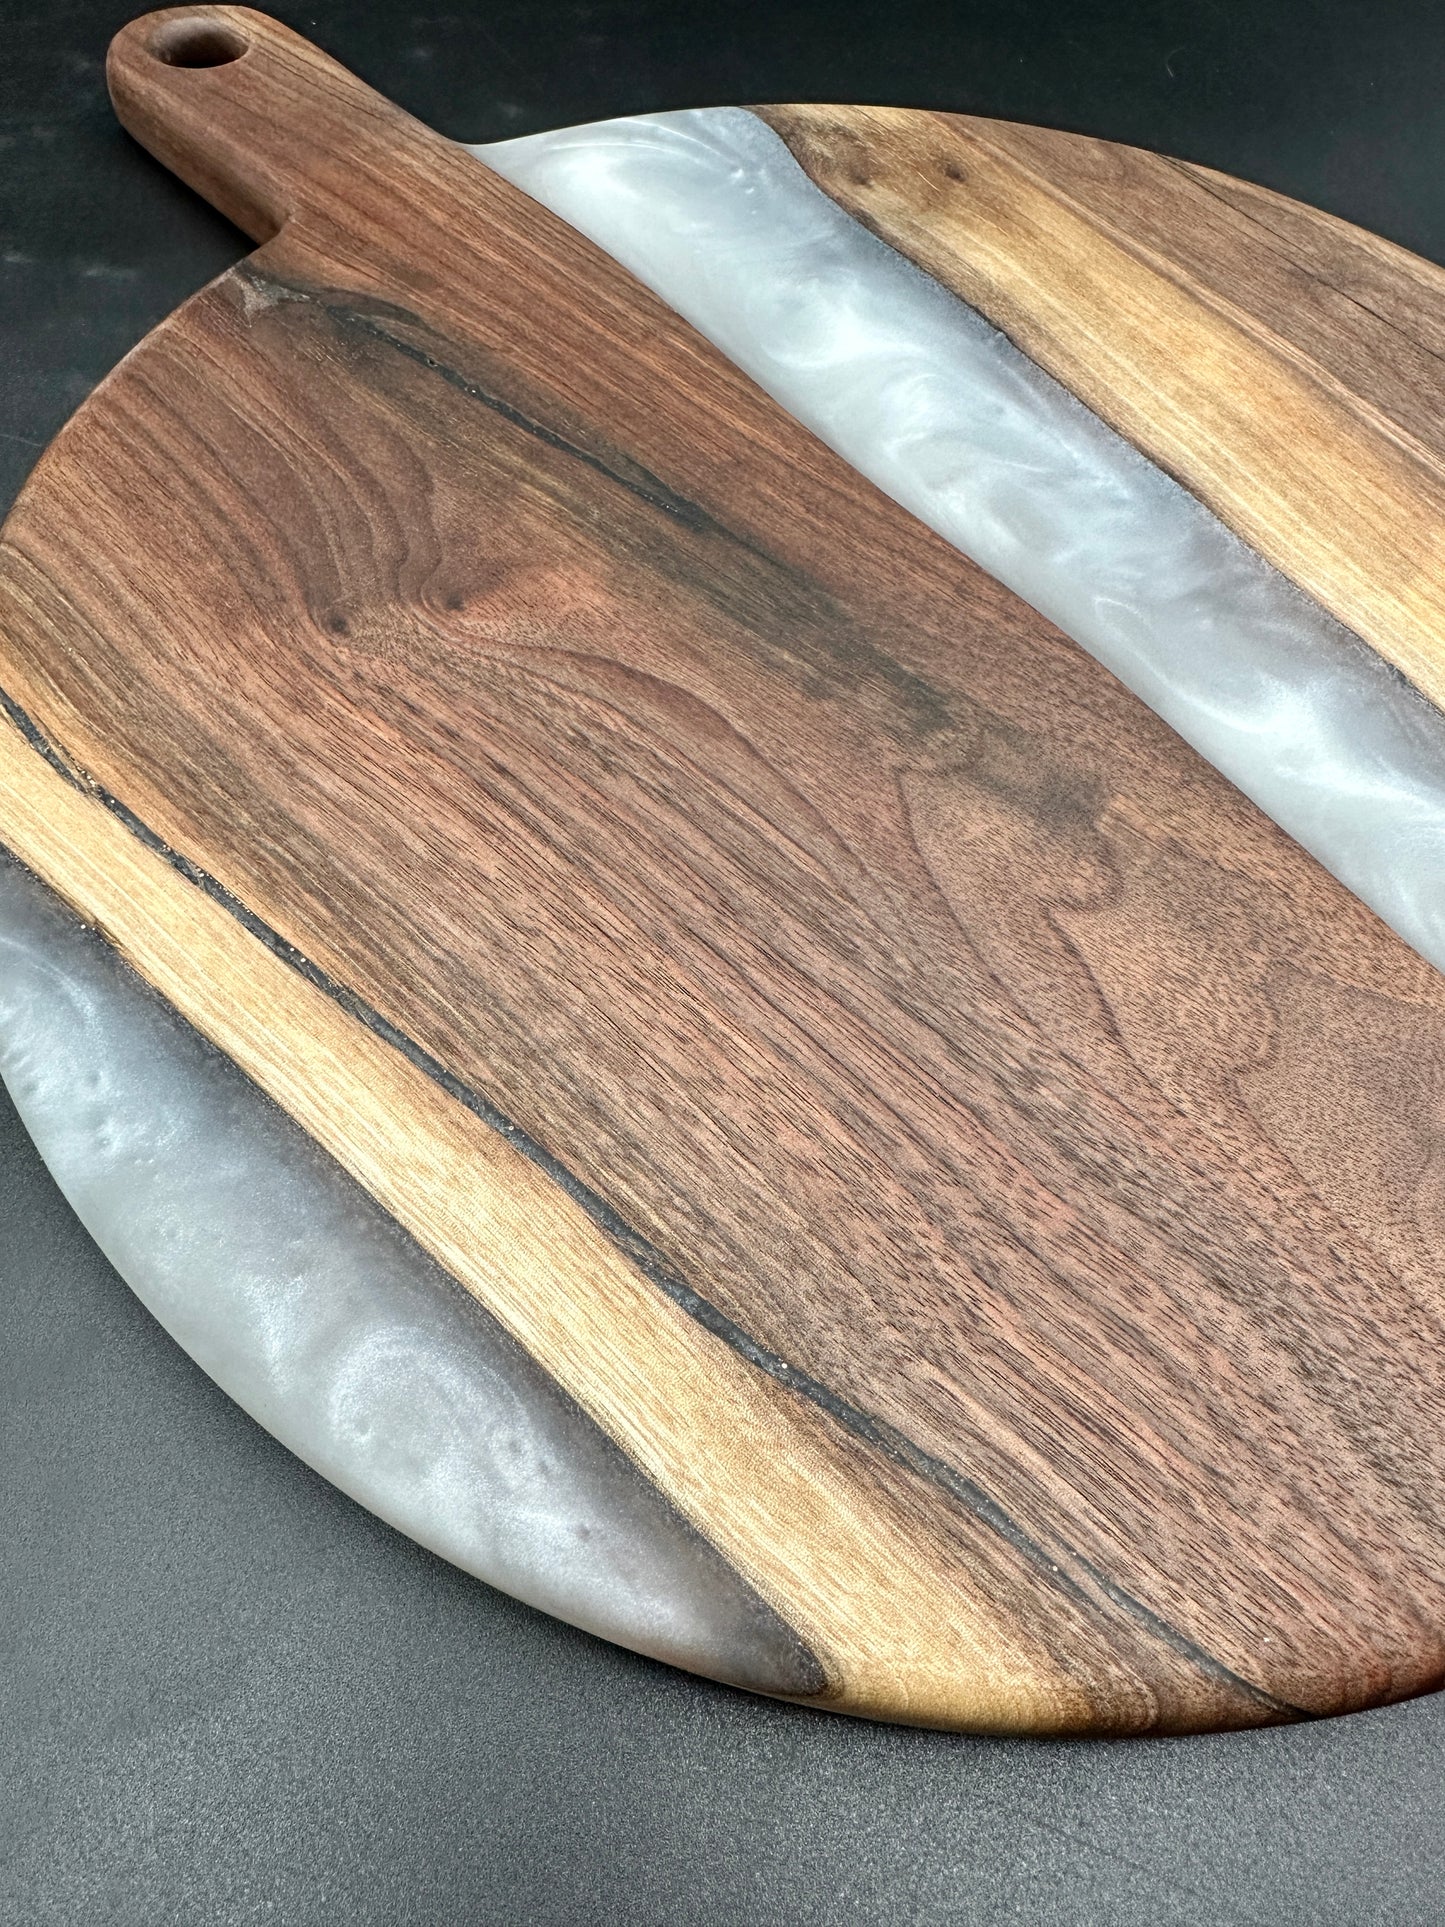 Small round walnut board with pearl white resin